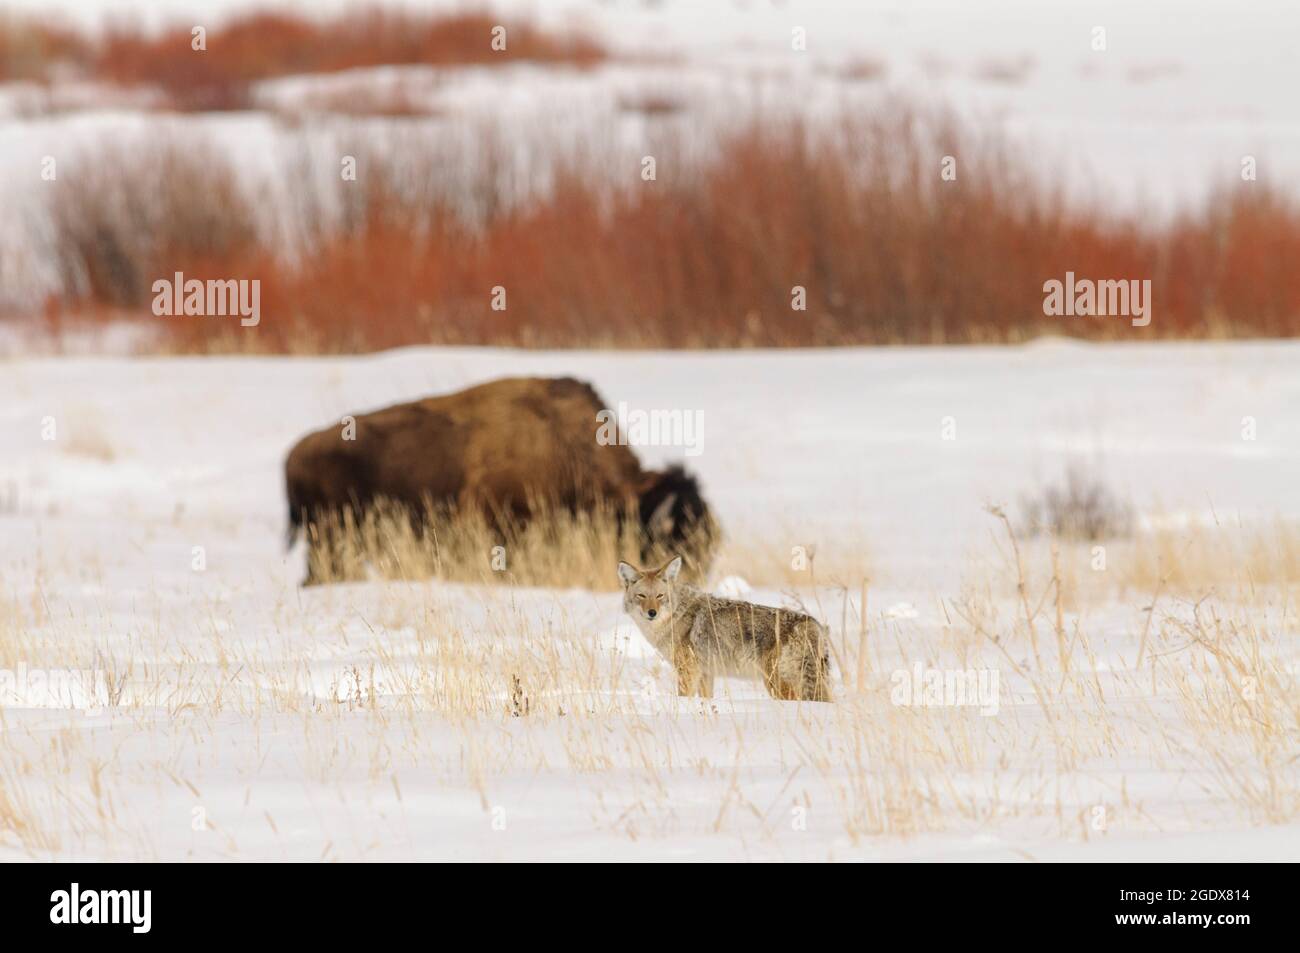 Coyote and Bison or Buffalo in a prairie landscape with snow, grasses and bushes in warm evening light. Stock Photo